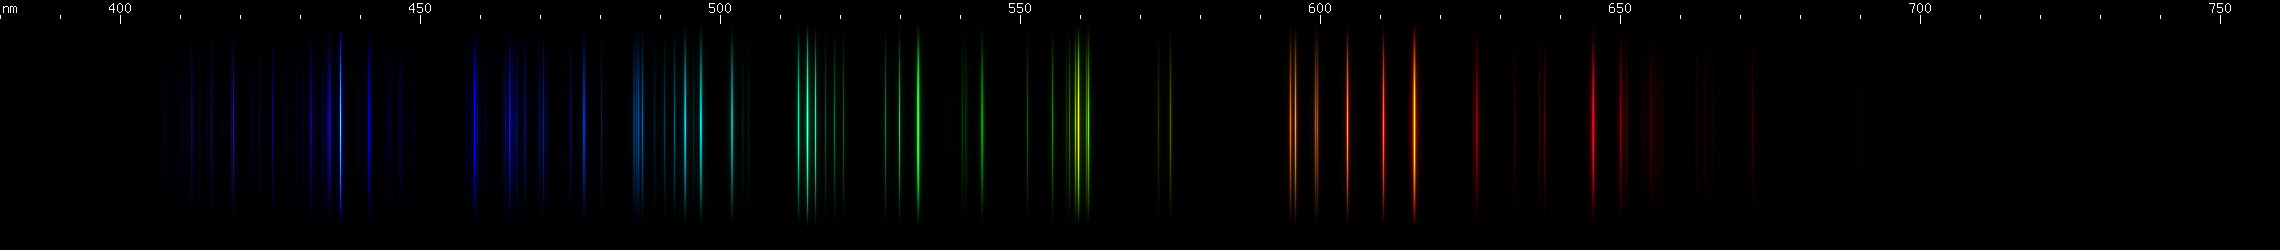 Spectral Lines of Oxygen